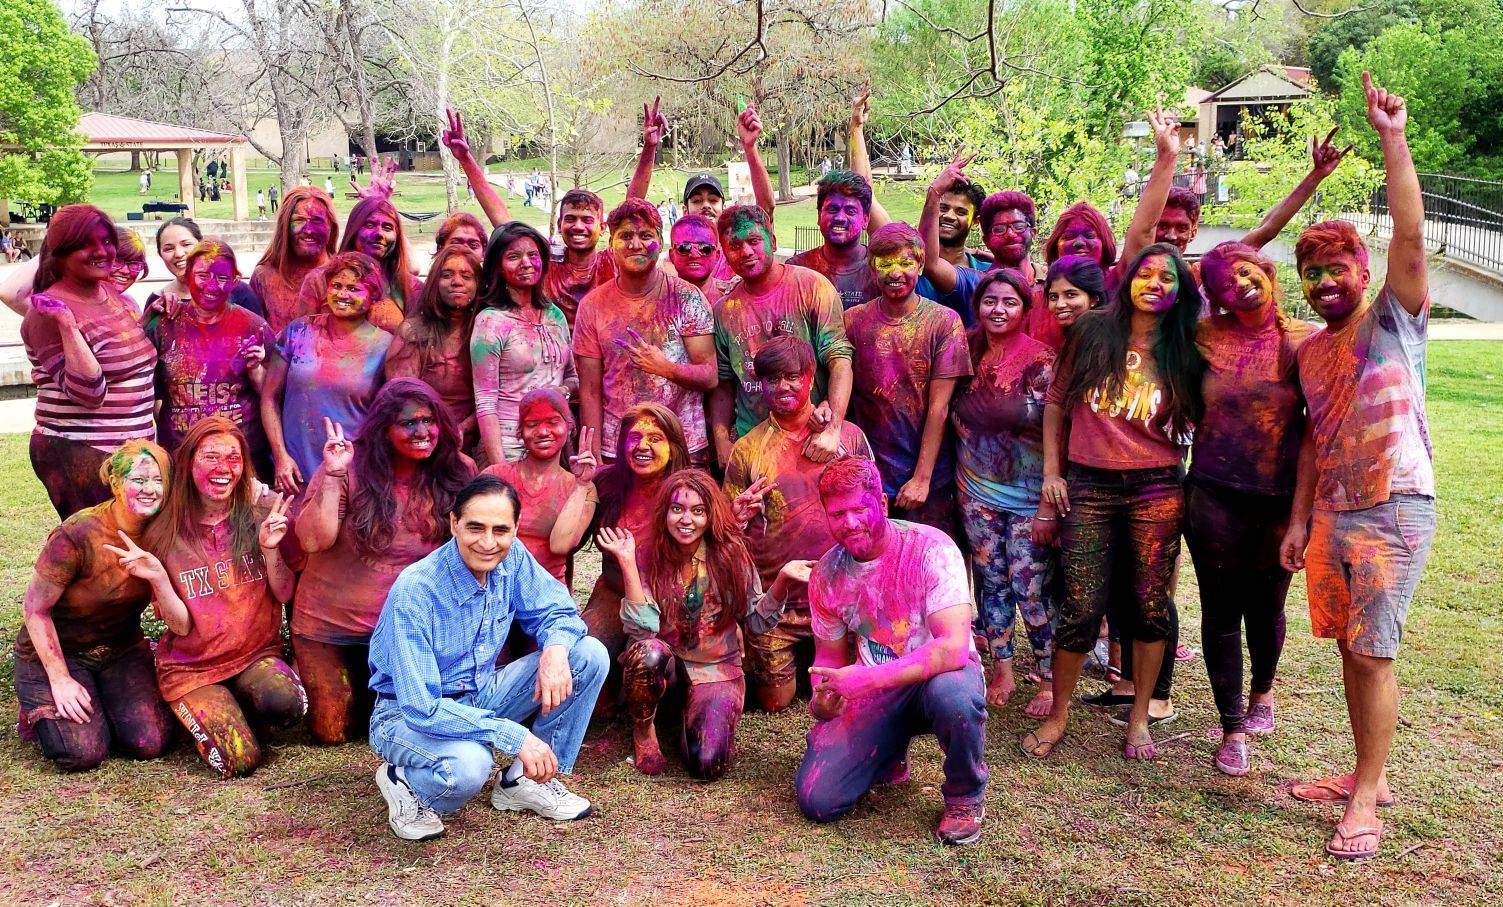 A group of students covered in colored powder smile for a photo at Sewell Park